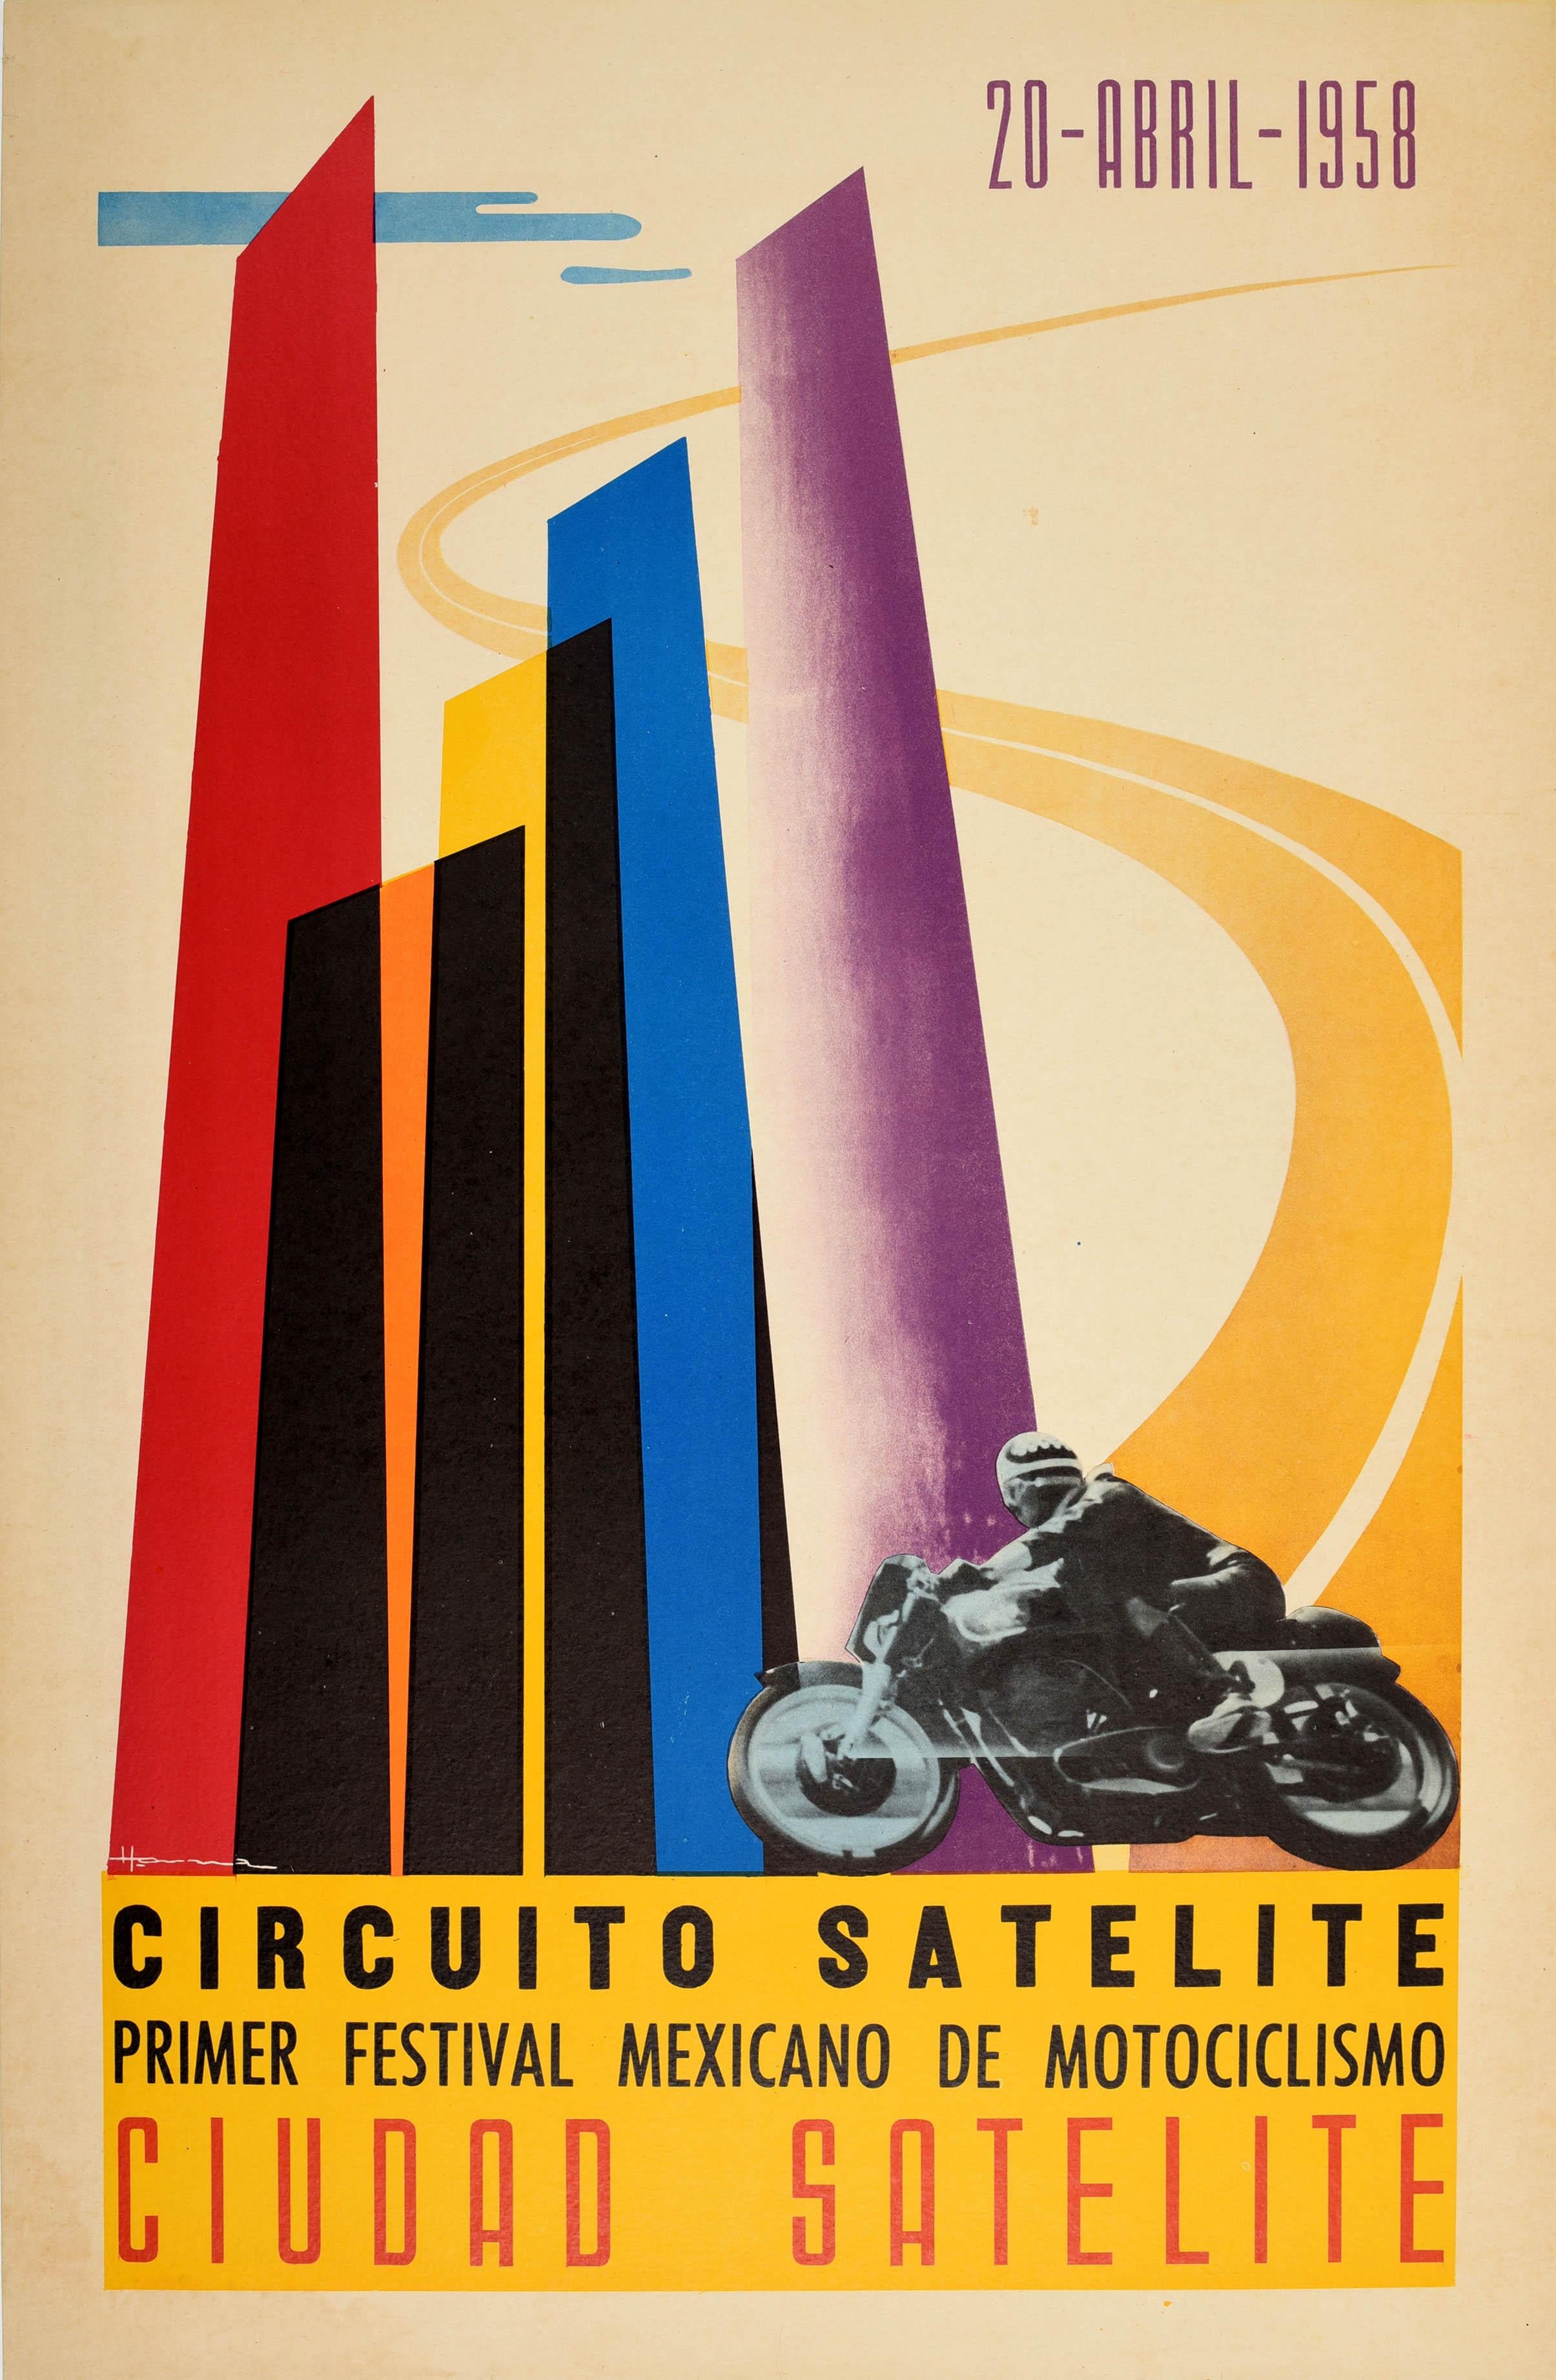 Original vintage motorsport poster advertising the Satellite Circuit First Mexican Motorcycle Festival in Satellite City / Circuito Satelite Primer Festival Mexicano de Motociclismo Ciudad Satelite on 20 April 1958 featuring a great graphic design